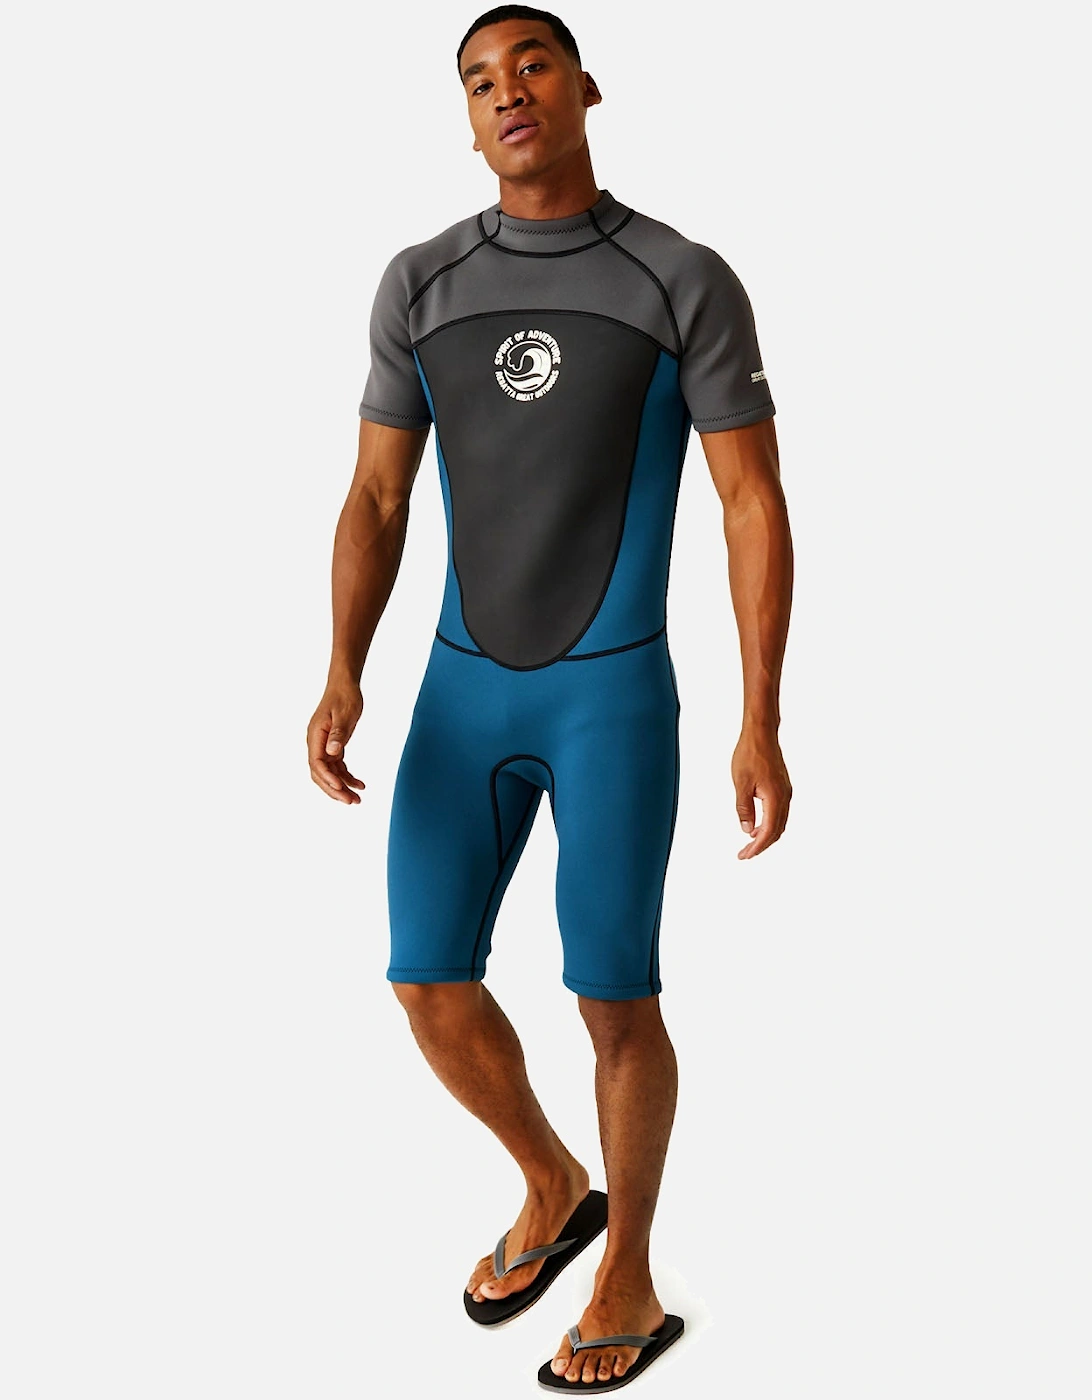 Mens Light Weight Quick Drying Short Wetsuit, 22 of 21